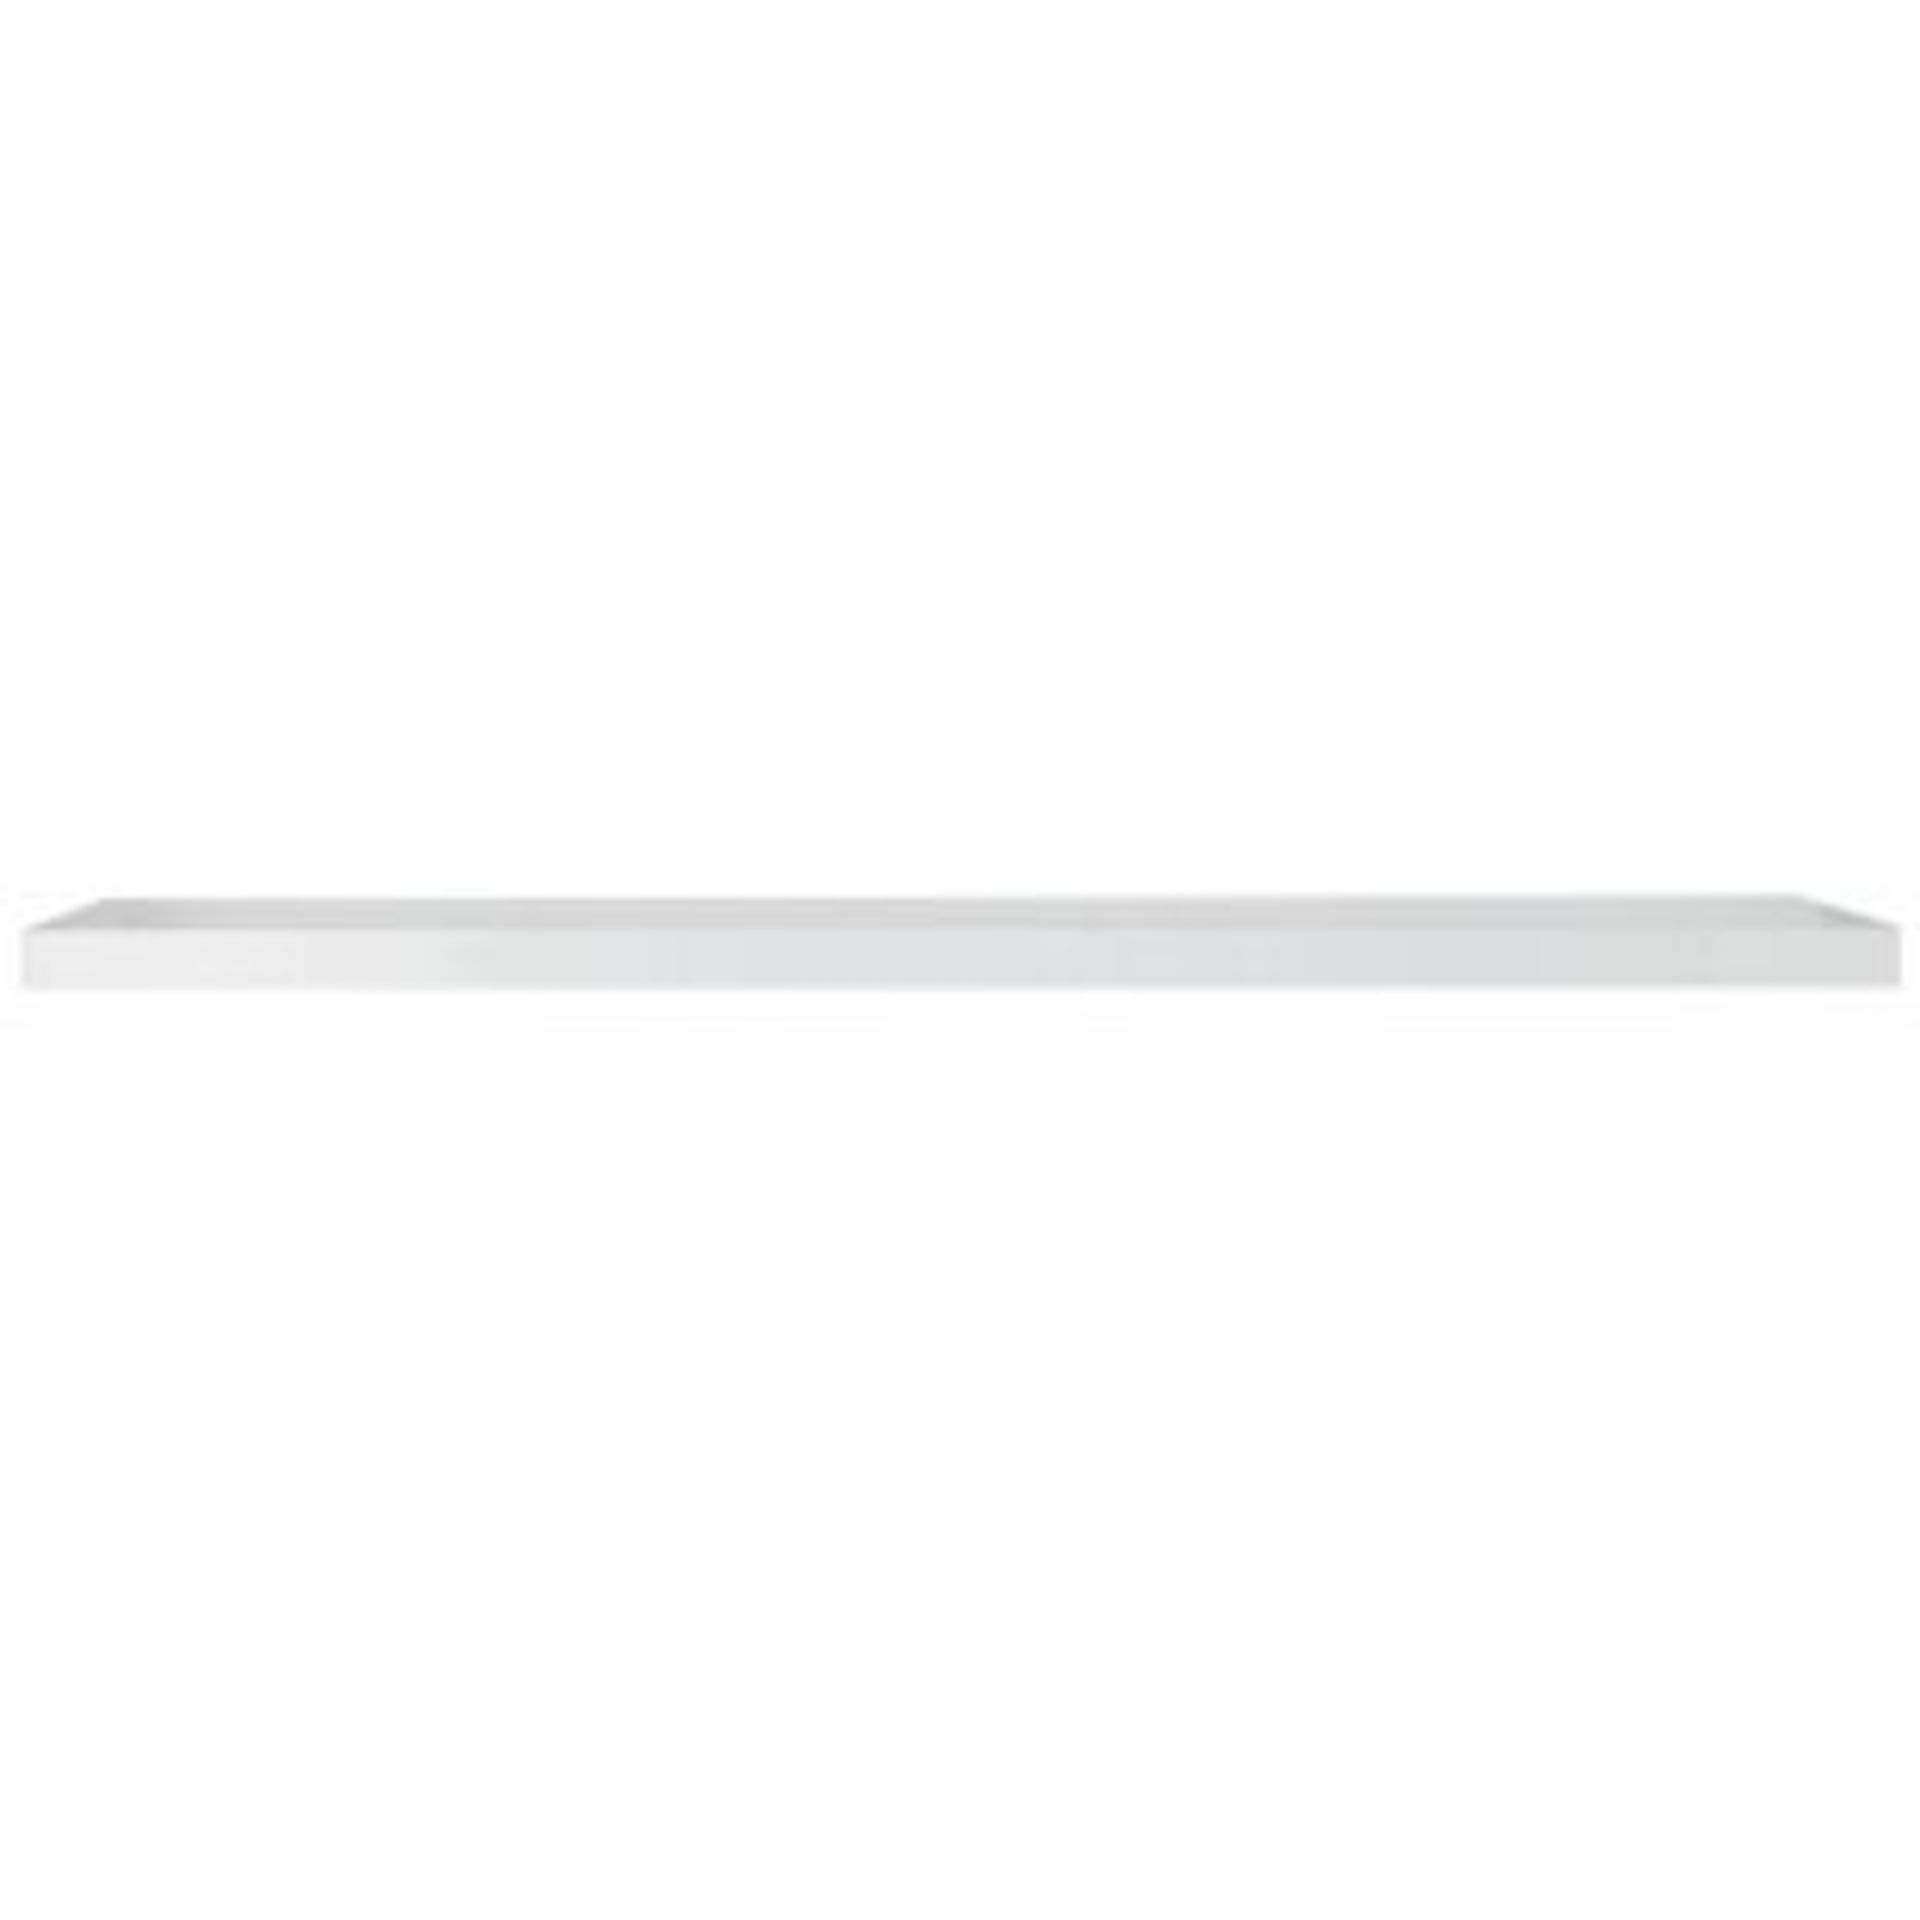 HOME 120cm Floating Shelf - White Gloss. Size H3.8, W120, D25cm. Boxed & Unchecked. Please Note